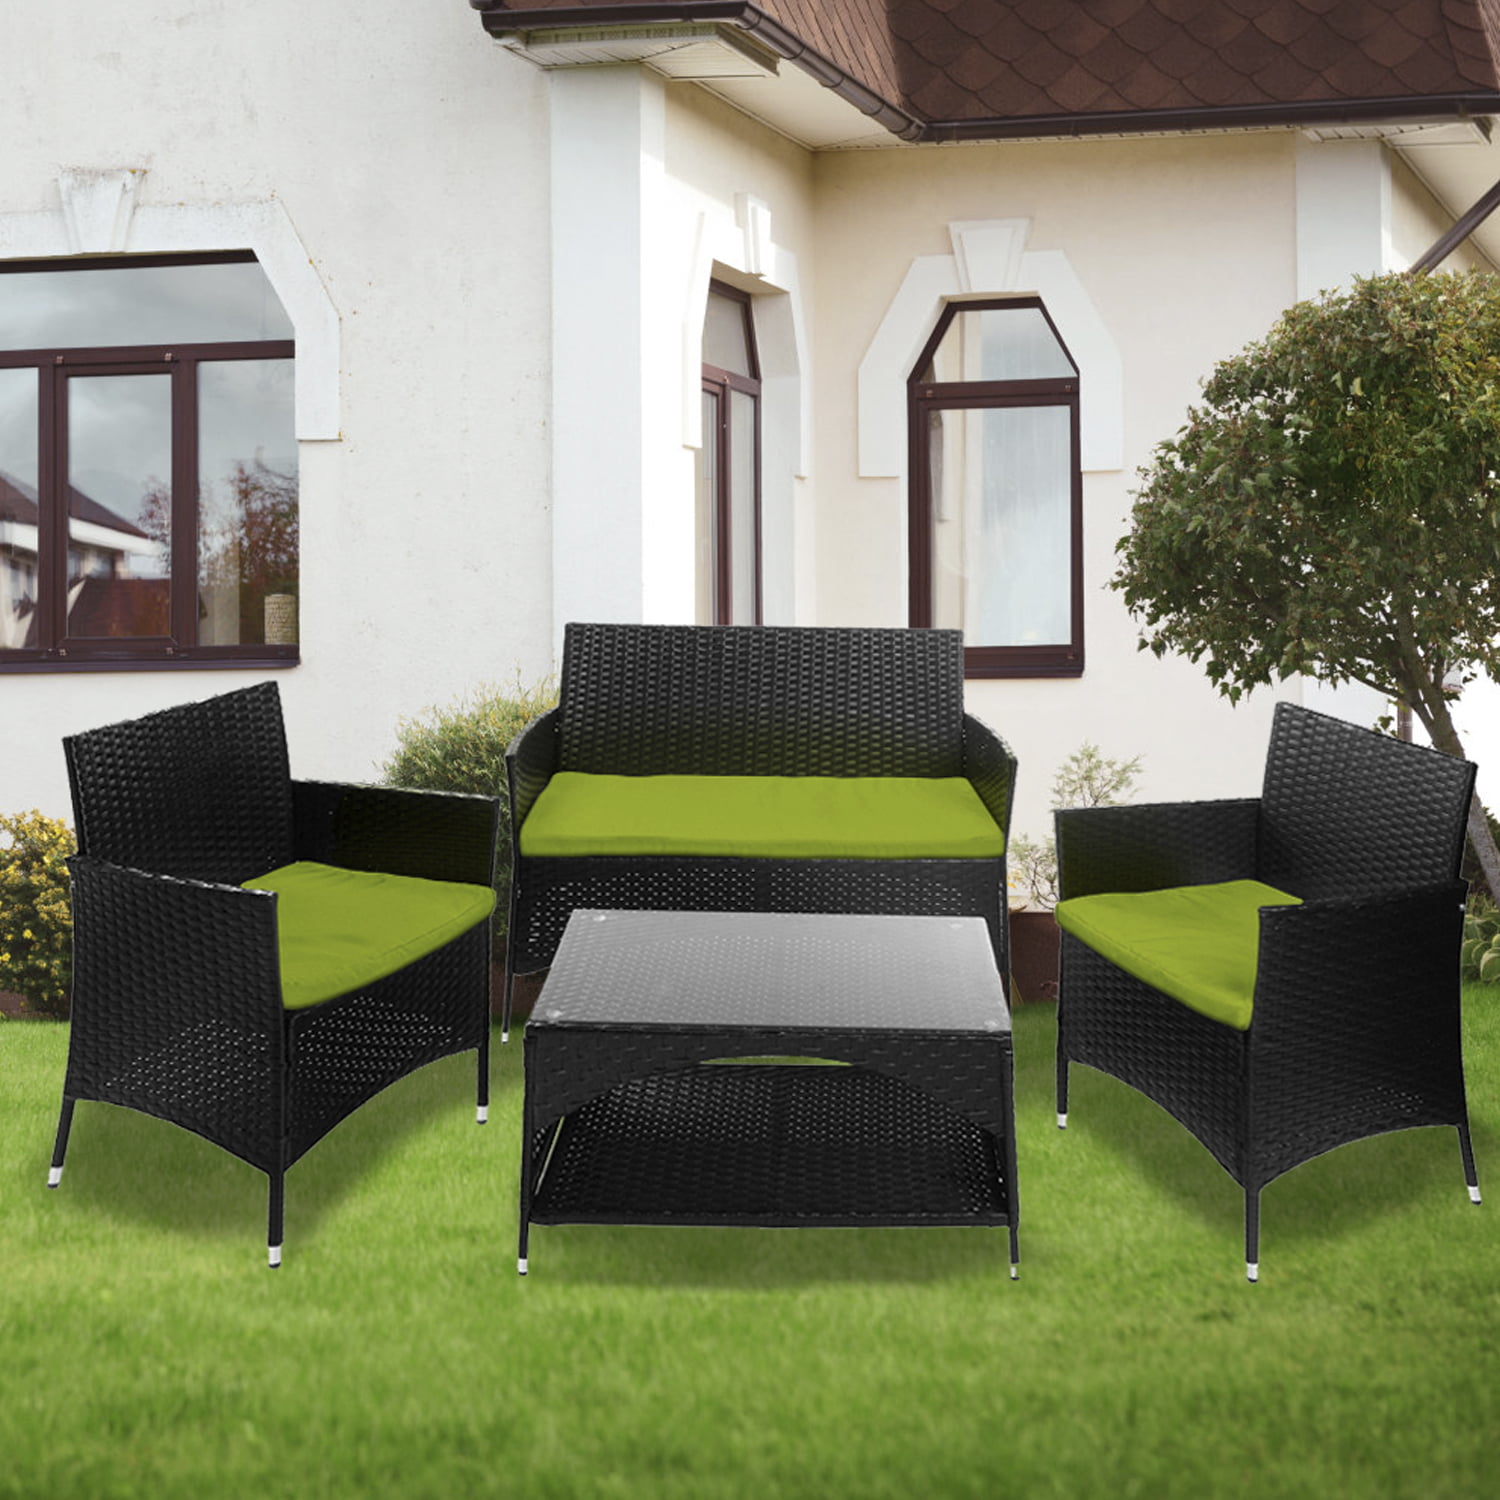 Details about   Large Garden Rattan Outdoor Furniture Cover Patio Table Chair Protection  #~ 